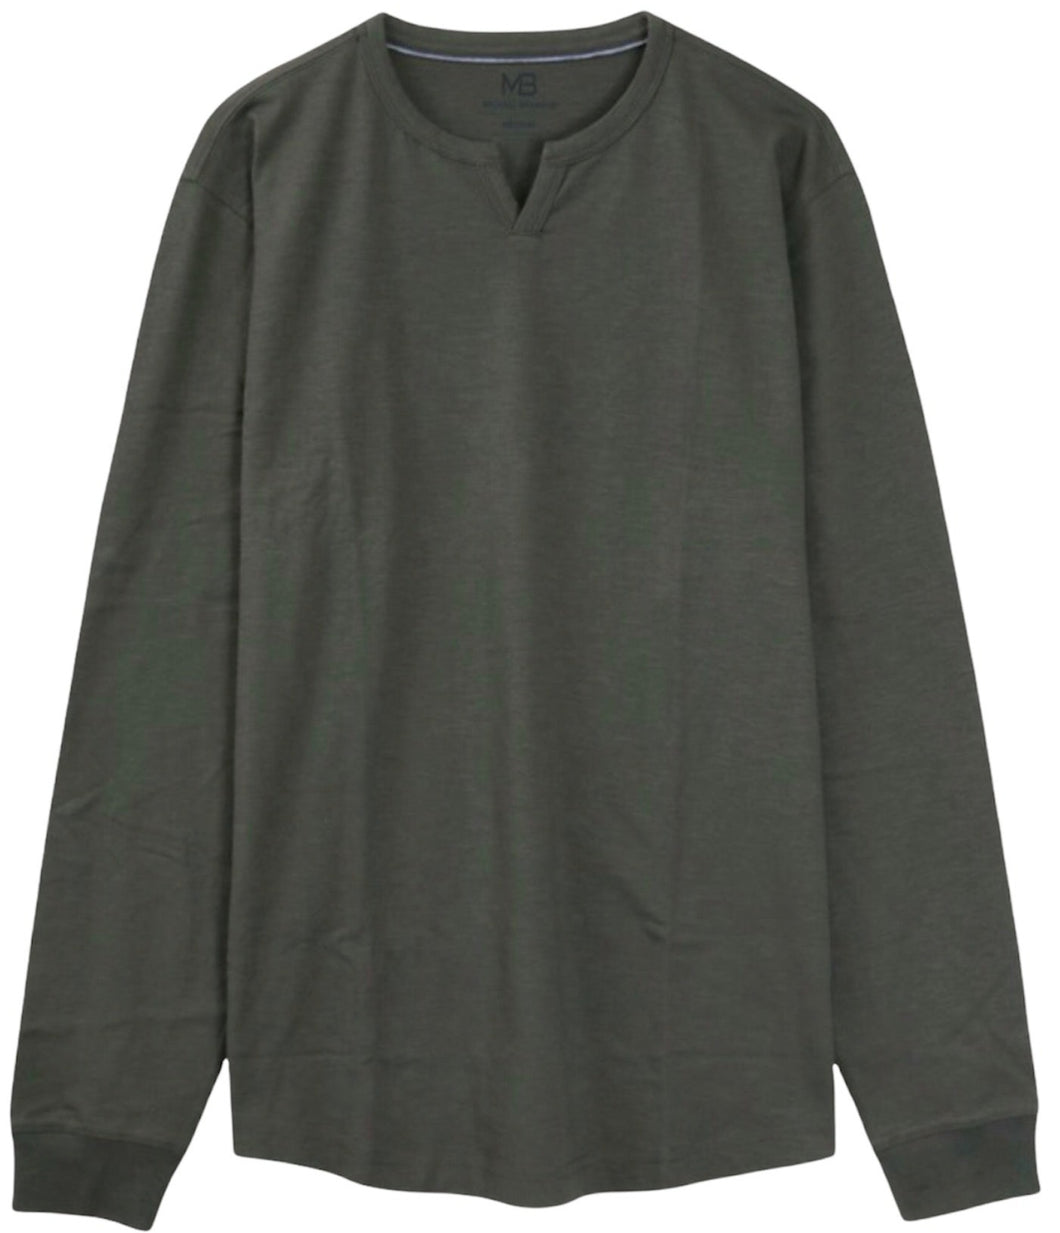 The Essential Olive Long Sleeve Notched V